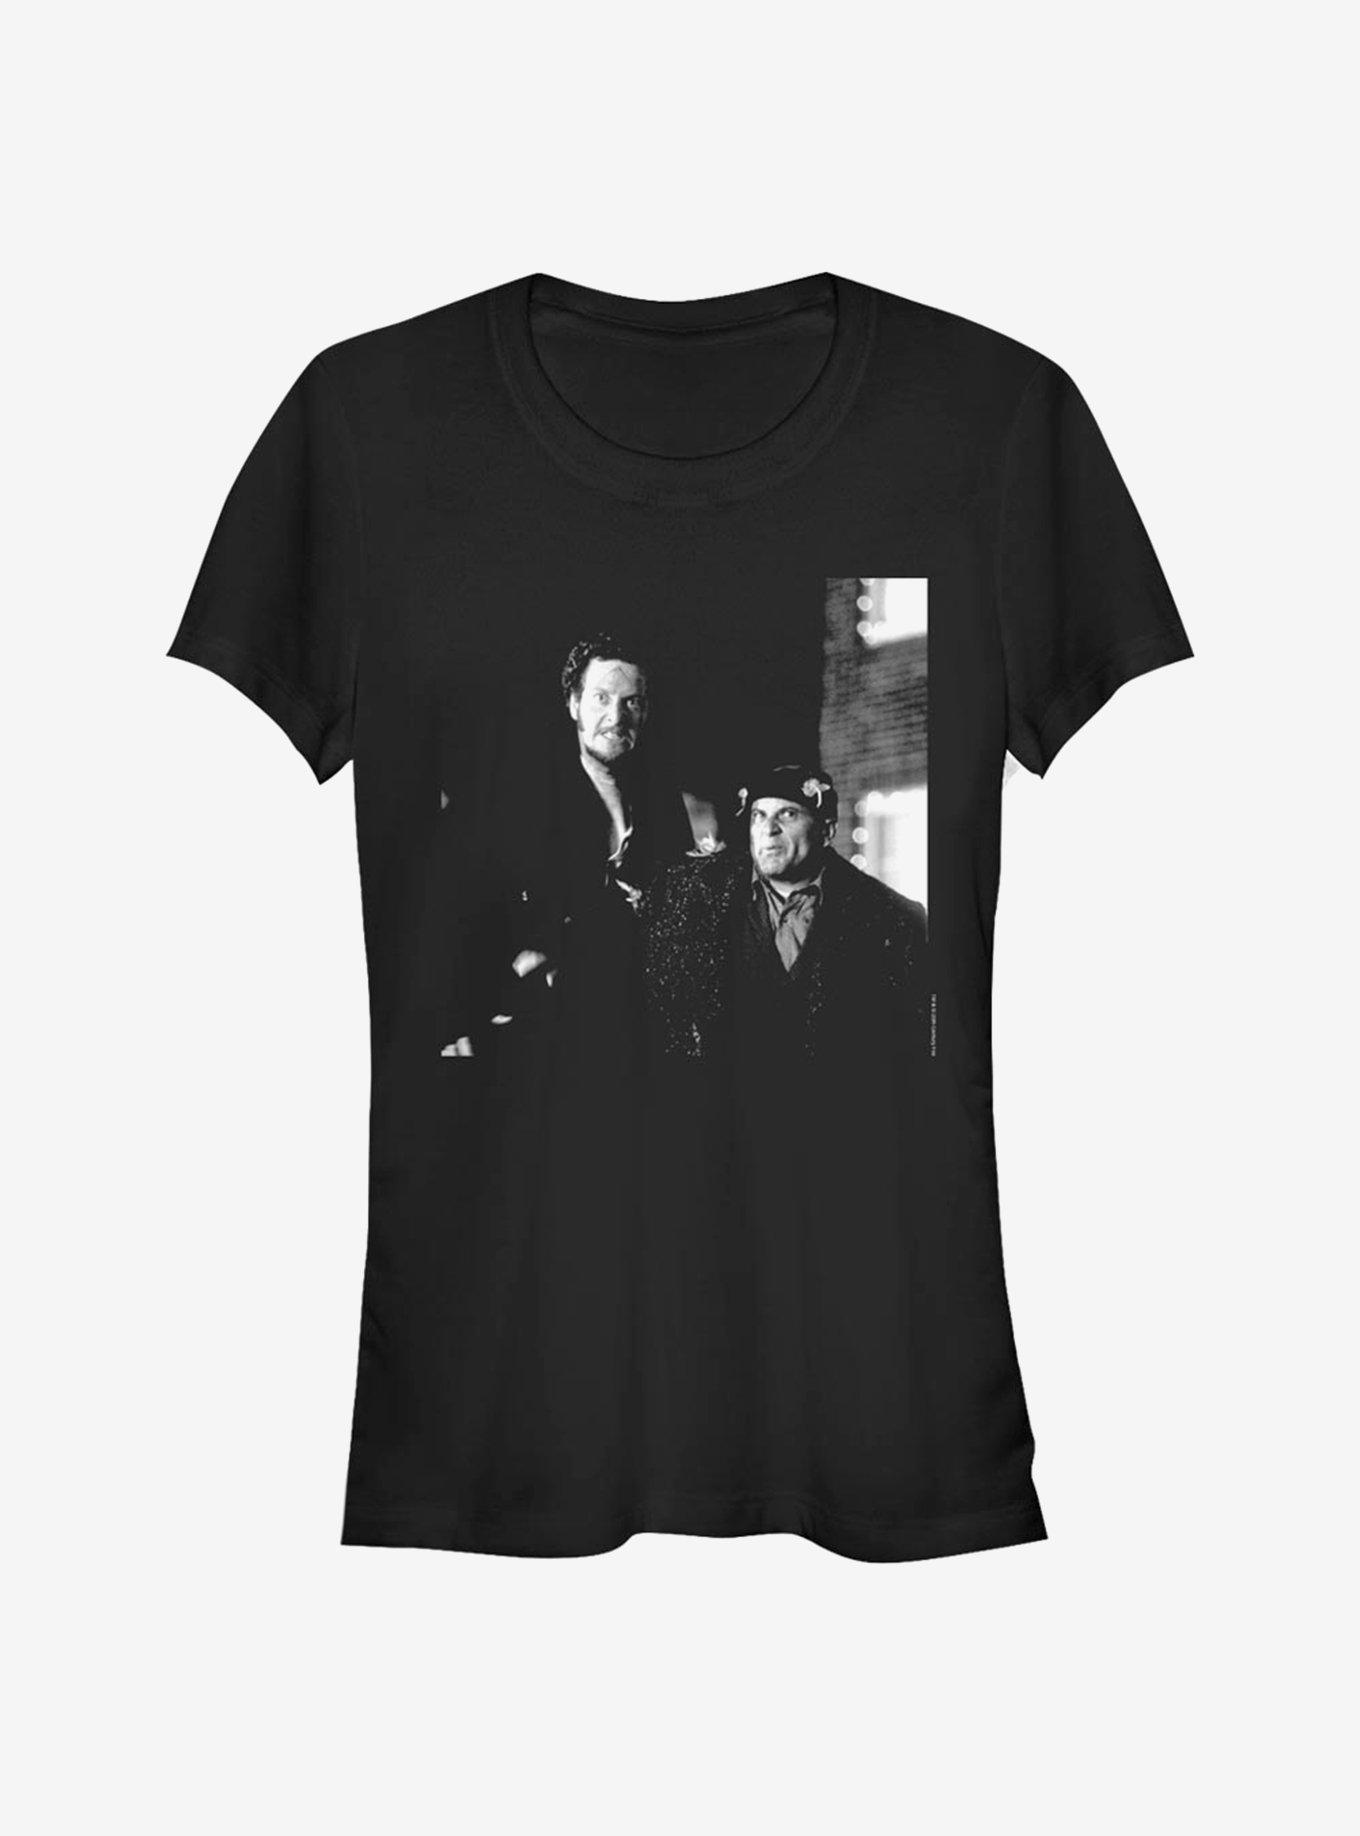 Home Alone Harry And Marv Photo Girls T-Shirt, BLACK, hi-res